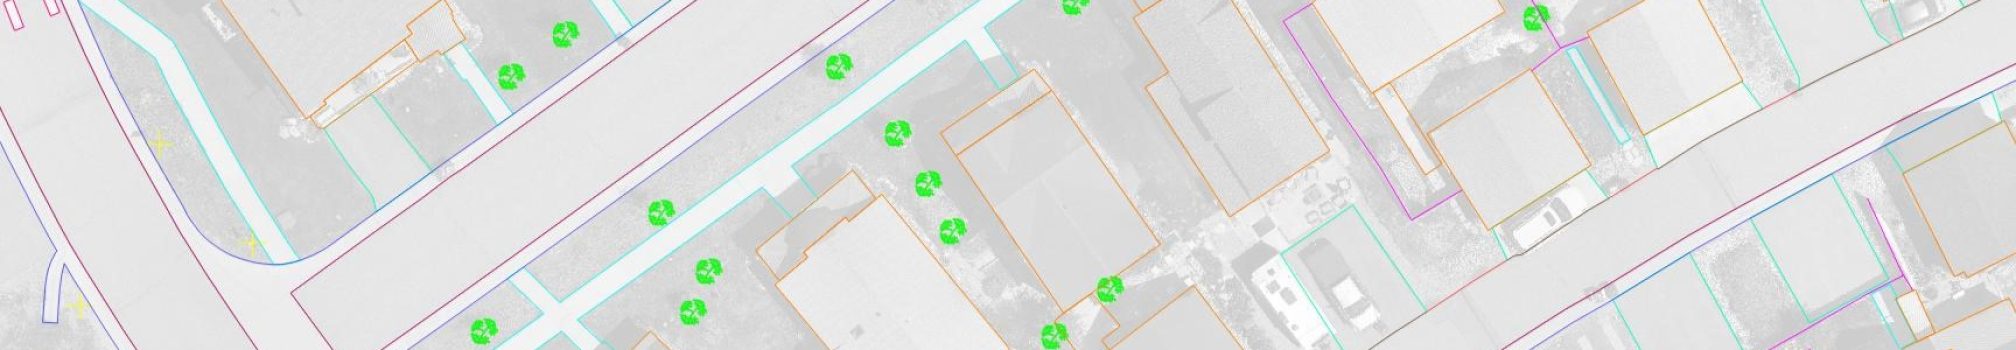 Get your project off the ground with high fidelity drone maps and data